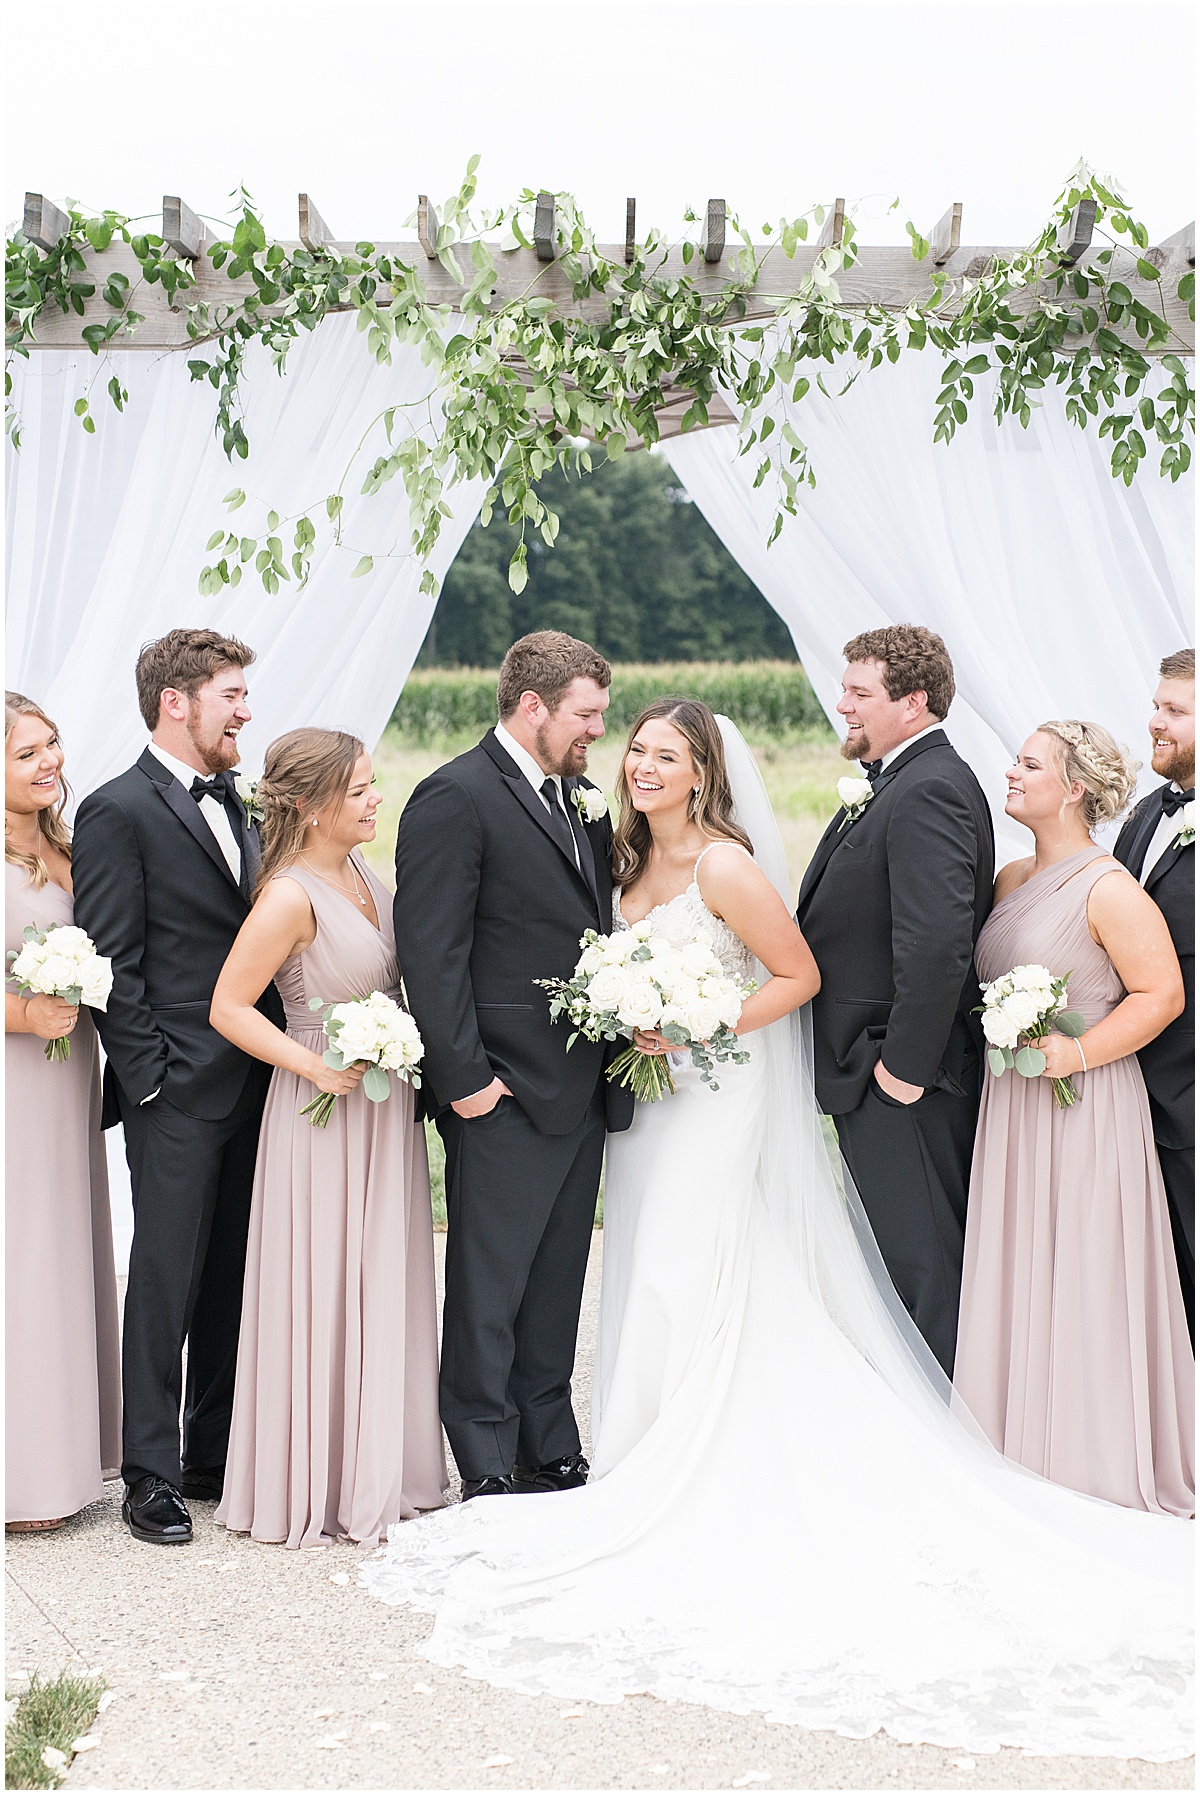 Wedding party photos after New Journey Farms wedding in Lafayette, Indiana by Victoria Rayburn Photography